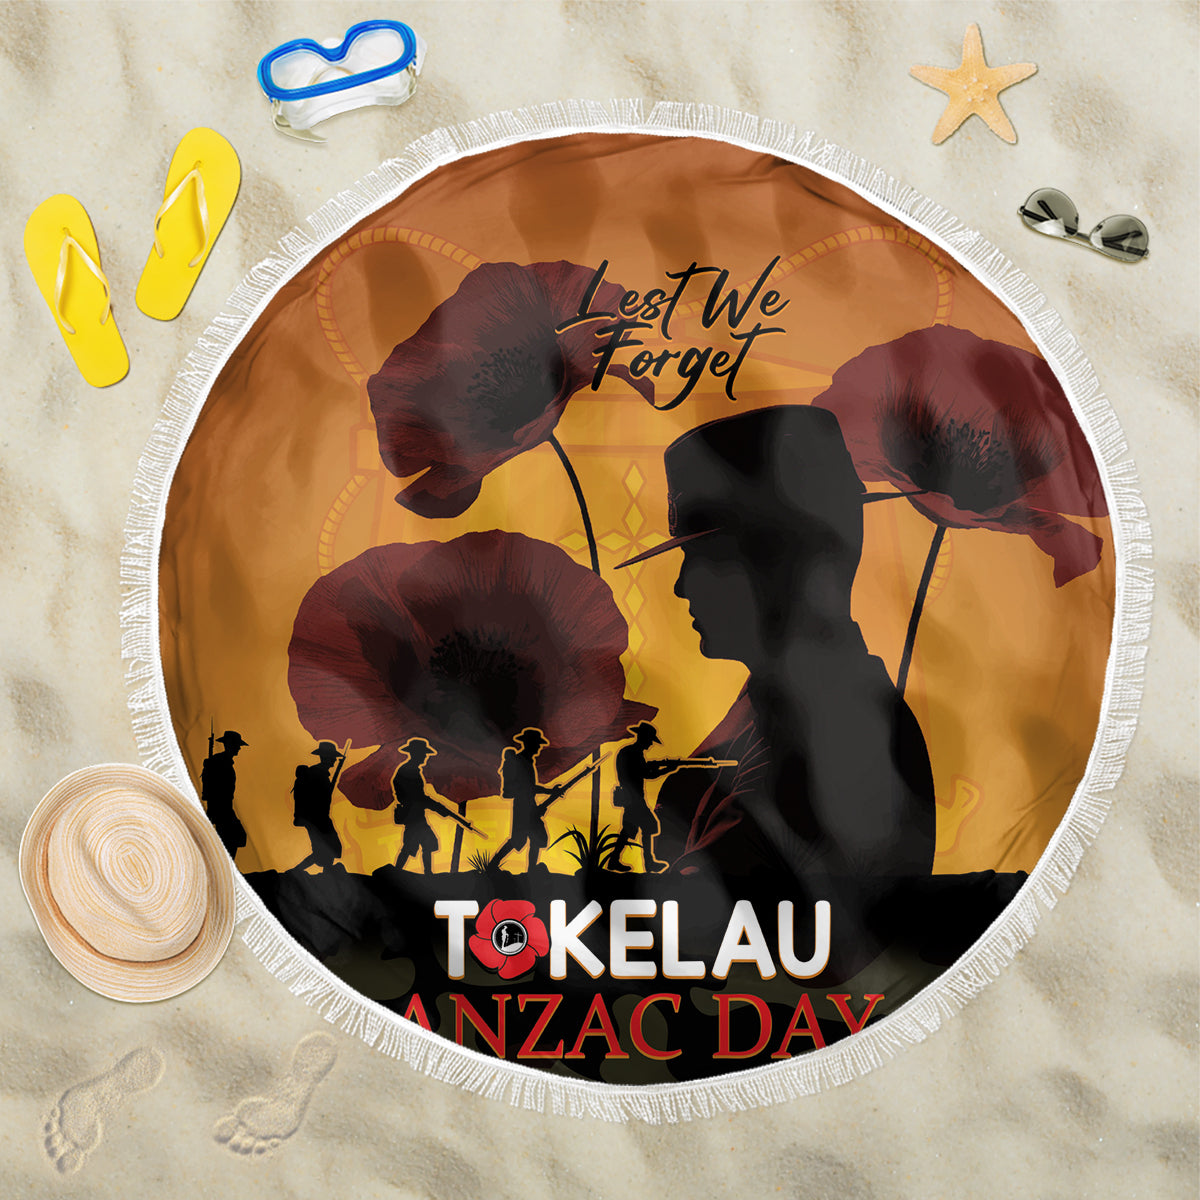 Tokelau ANZAC Day Beach Blanket Camouflage With Poppies Lest We Forget LT14 One Size 150cm Yellow - Polynesian Pride